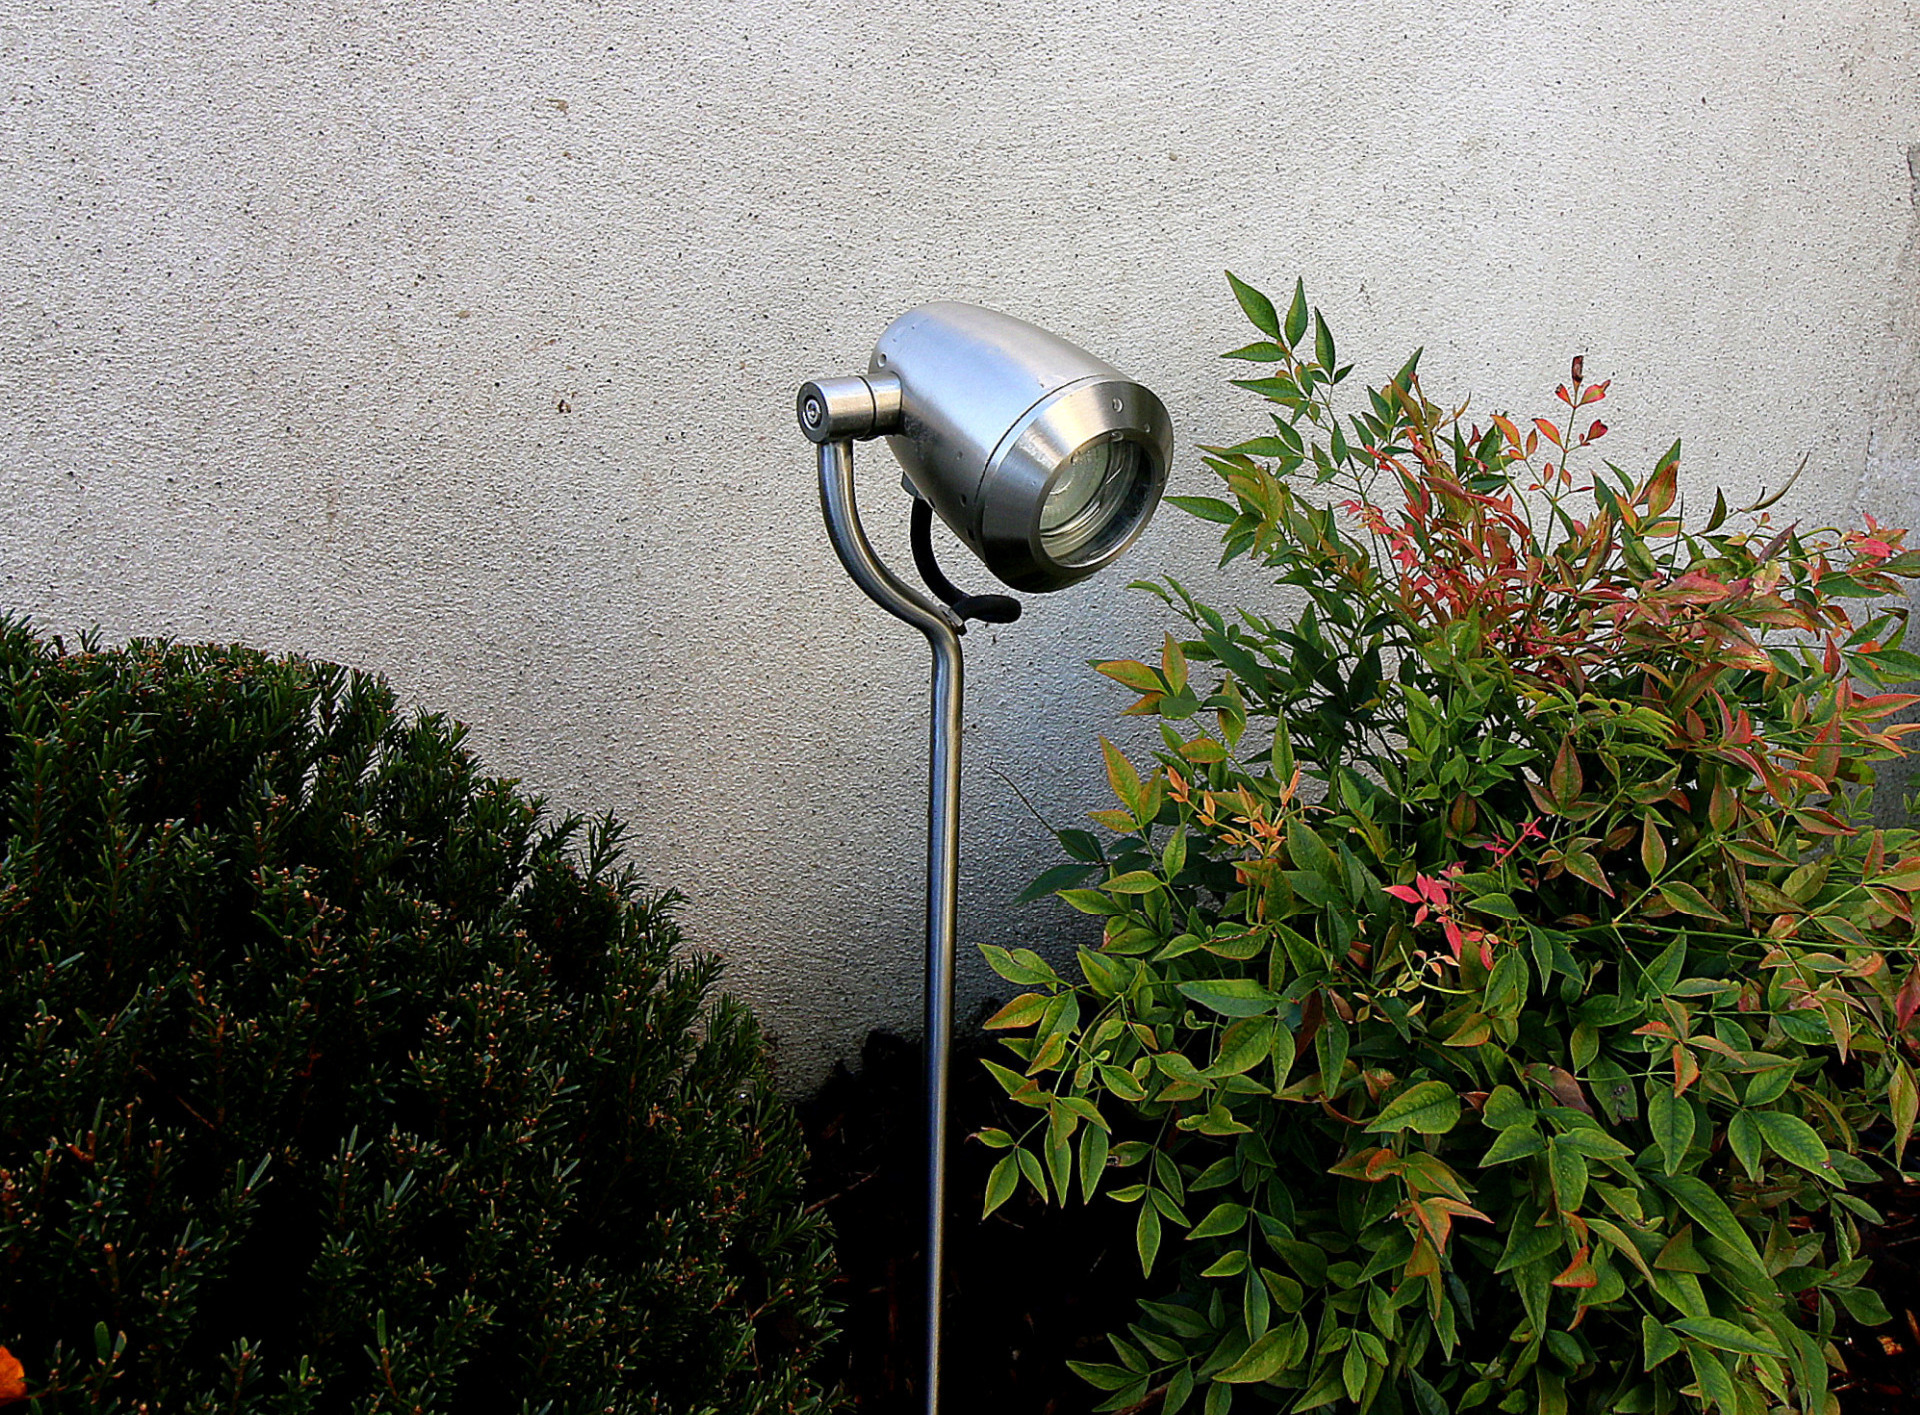 Stainless Steel Outdoor LED Driveway Lighting  |  Design & Installation by Owen Chubb Garden Landscapers, Tel 087-2306128